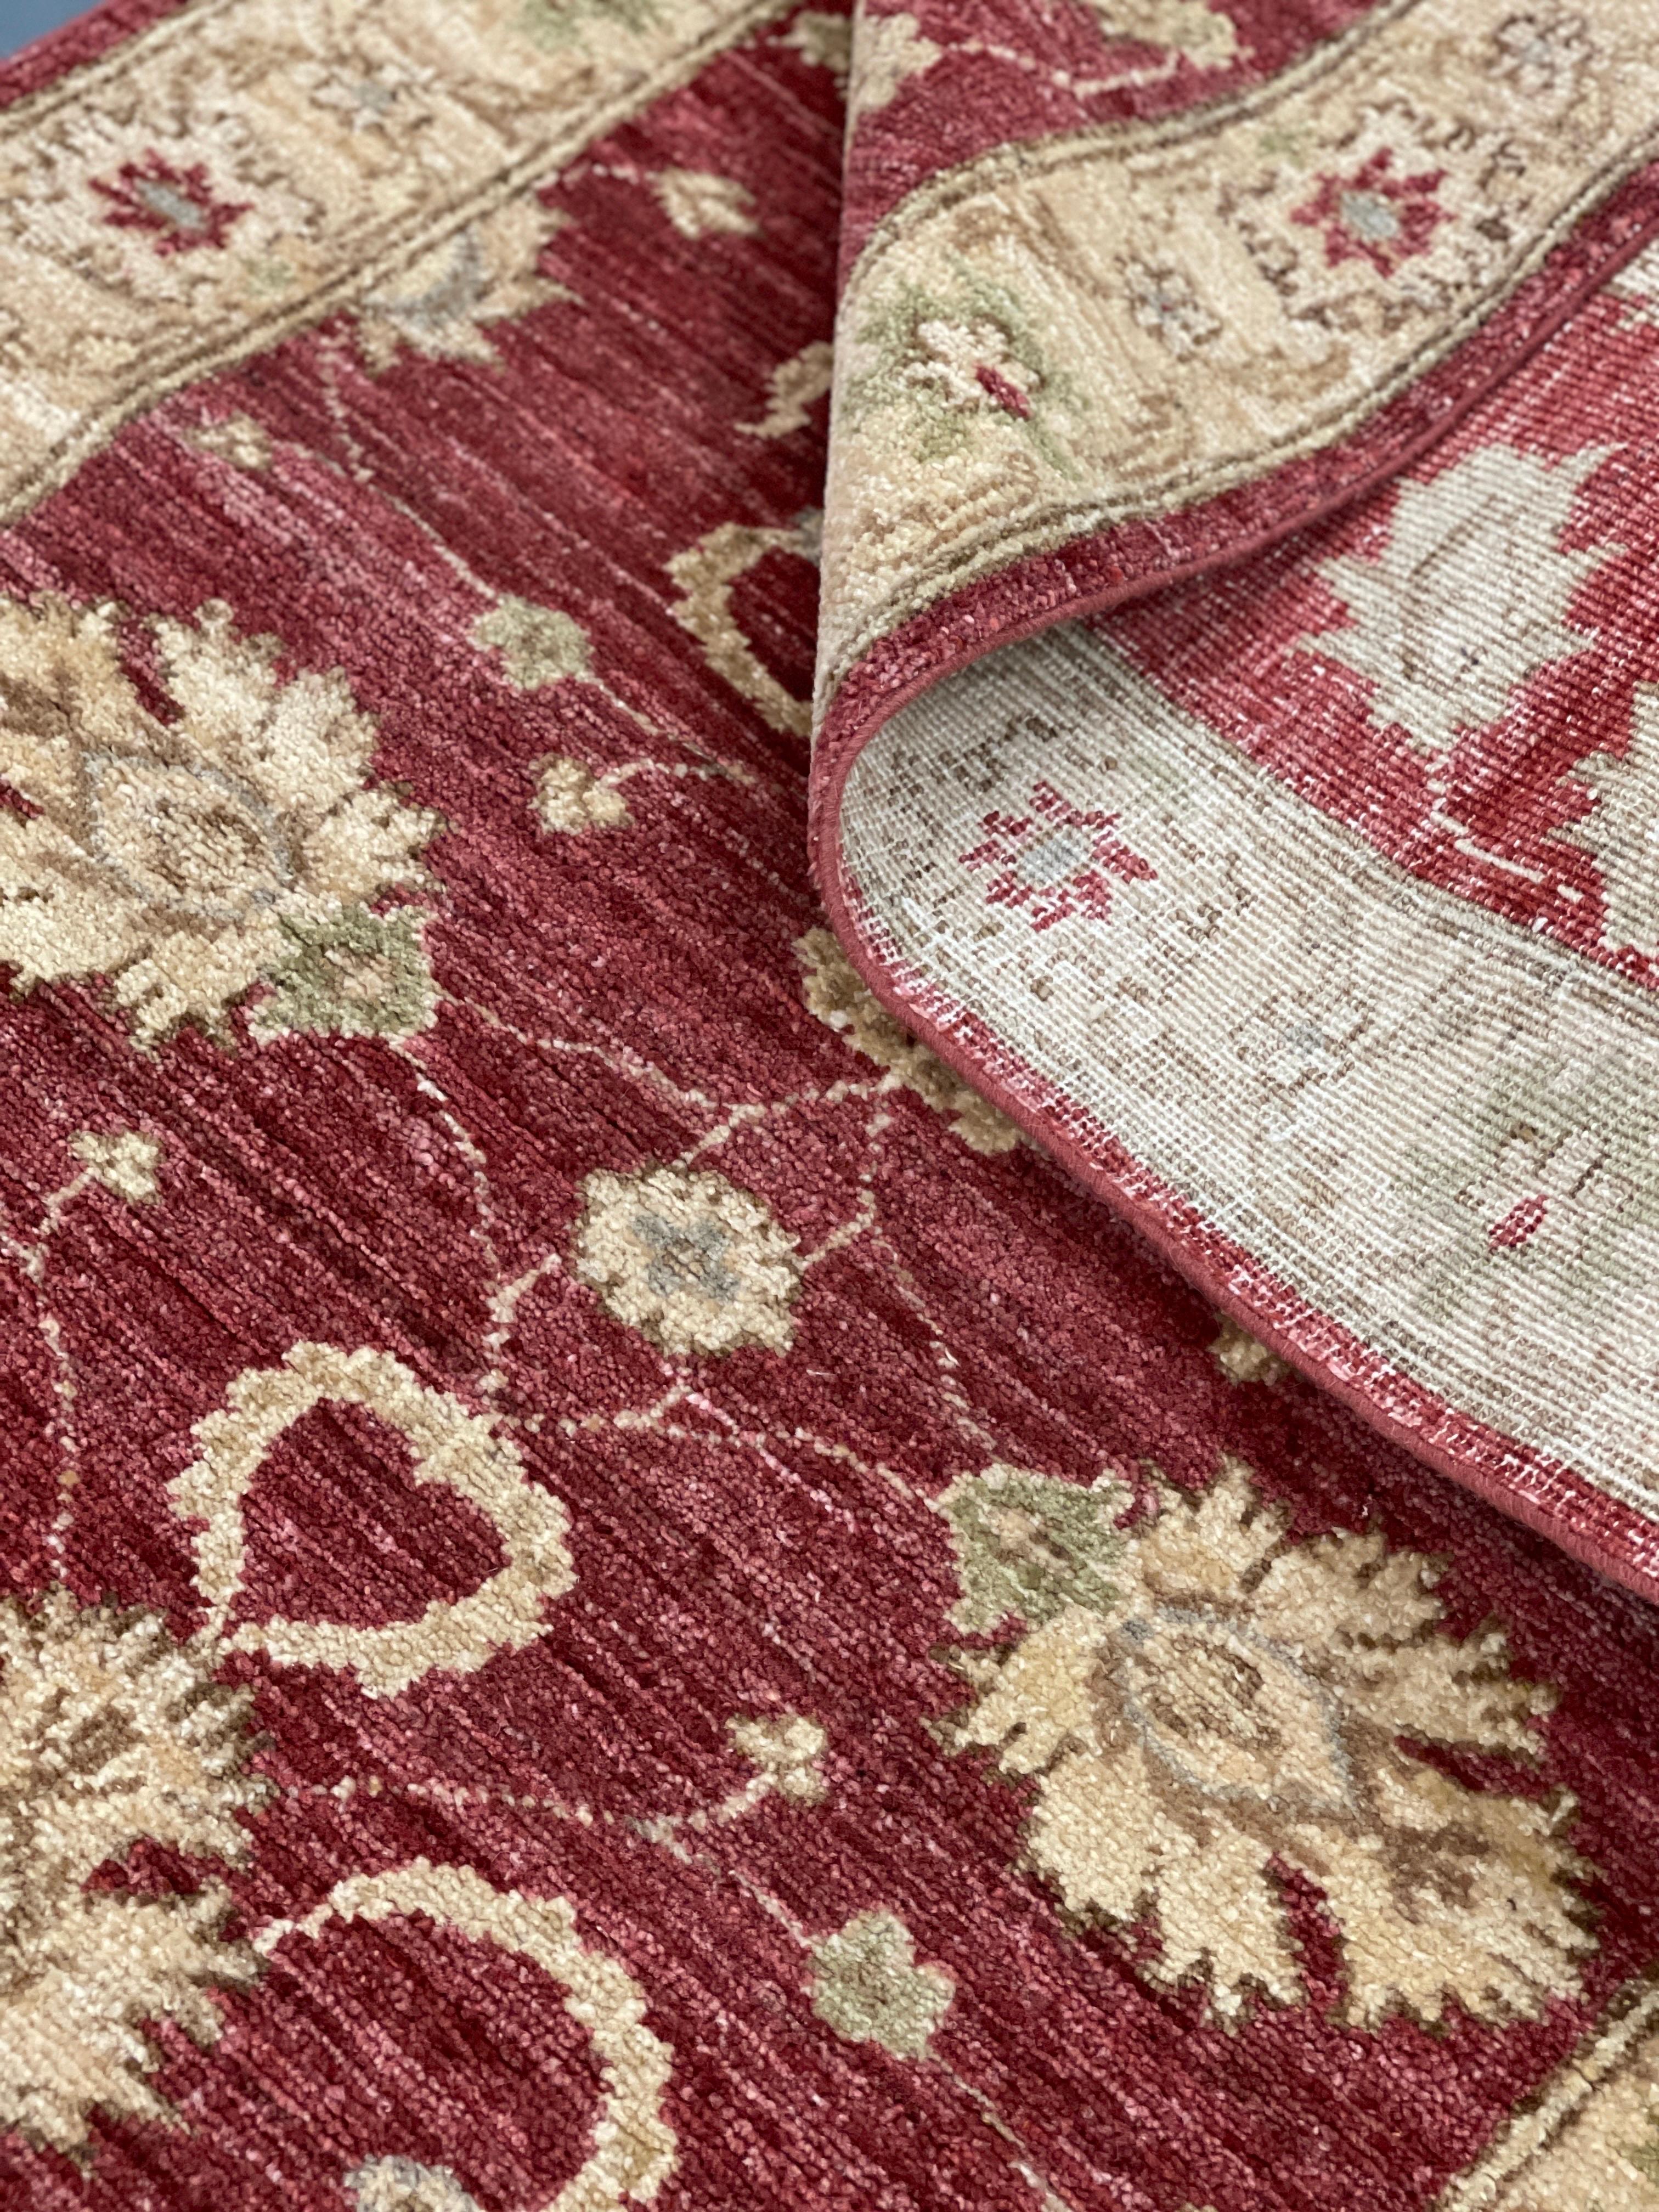 Wine Red Traditional Runner Rug, Burgundy Wool Carpet Runner Home Decor In Excellent Condition For Sale In Hampshire, GB